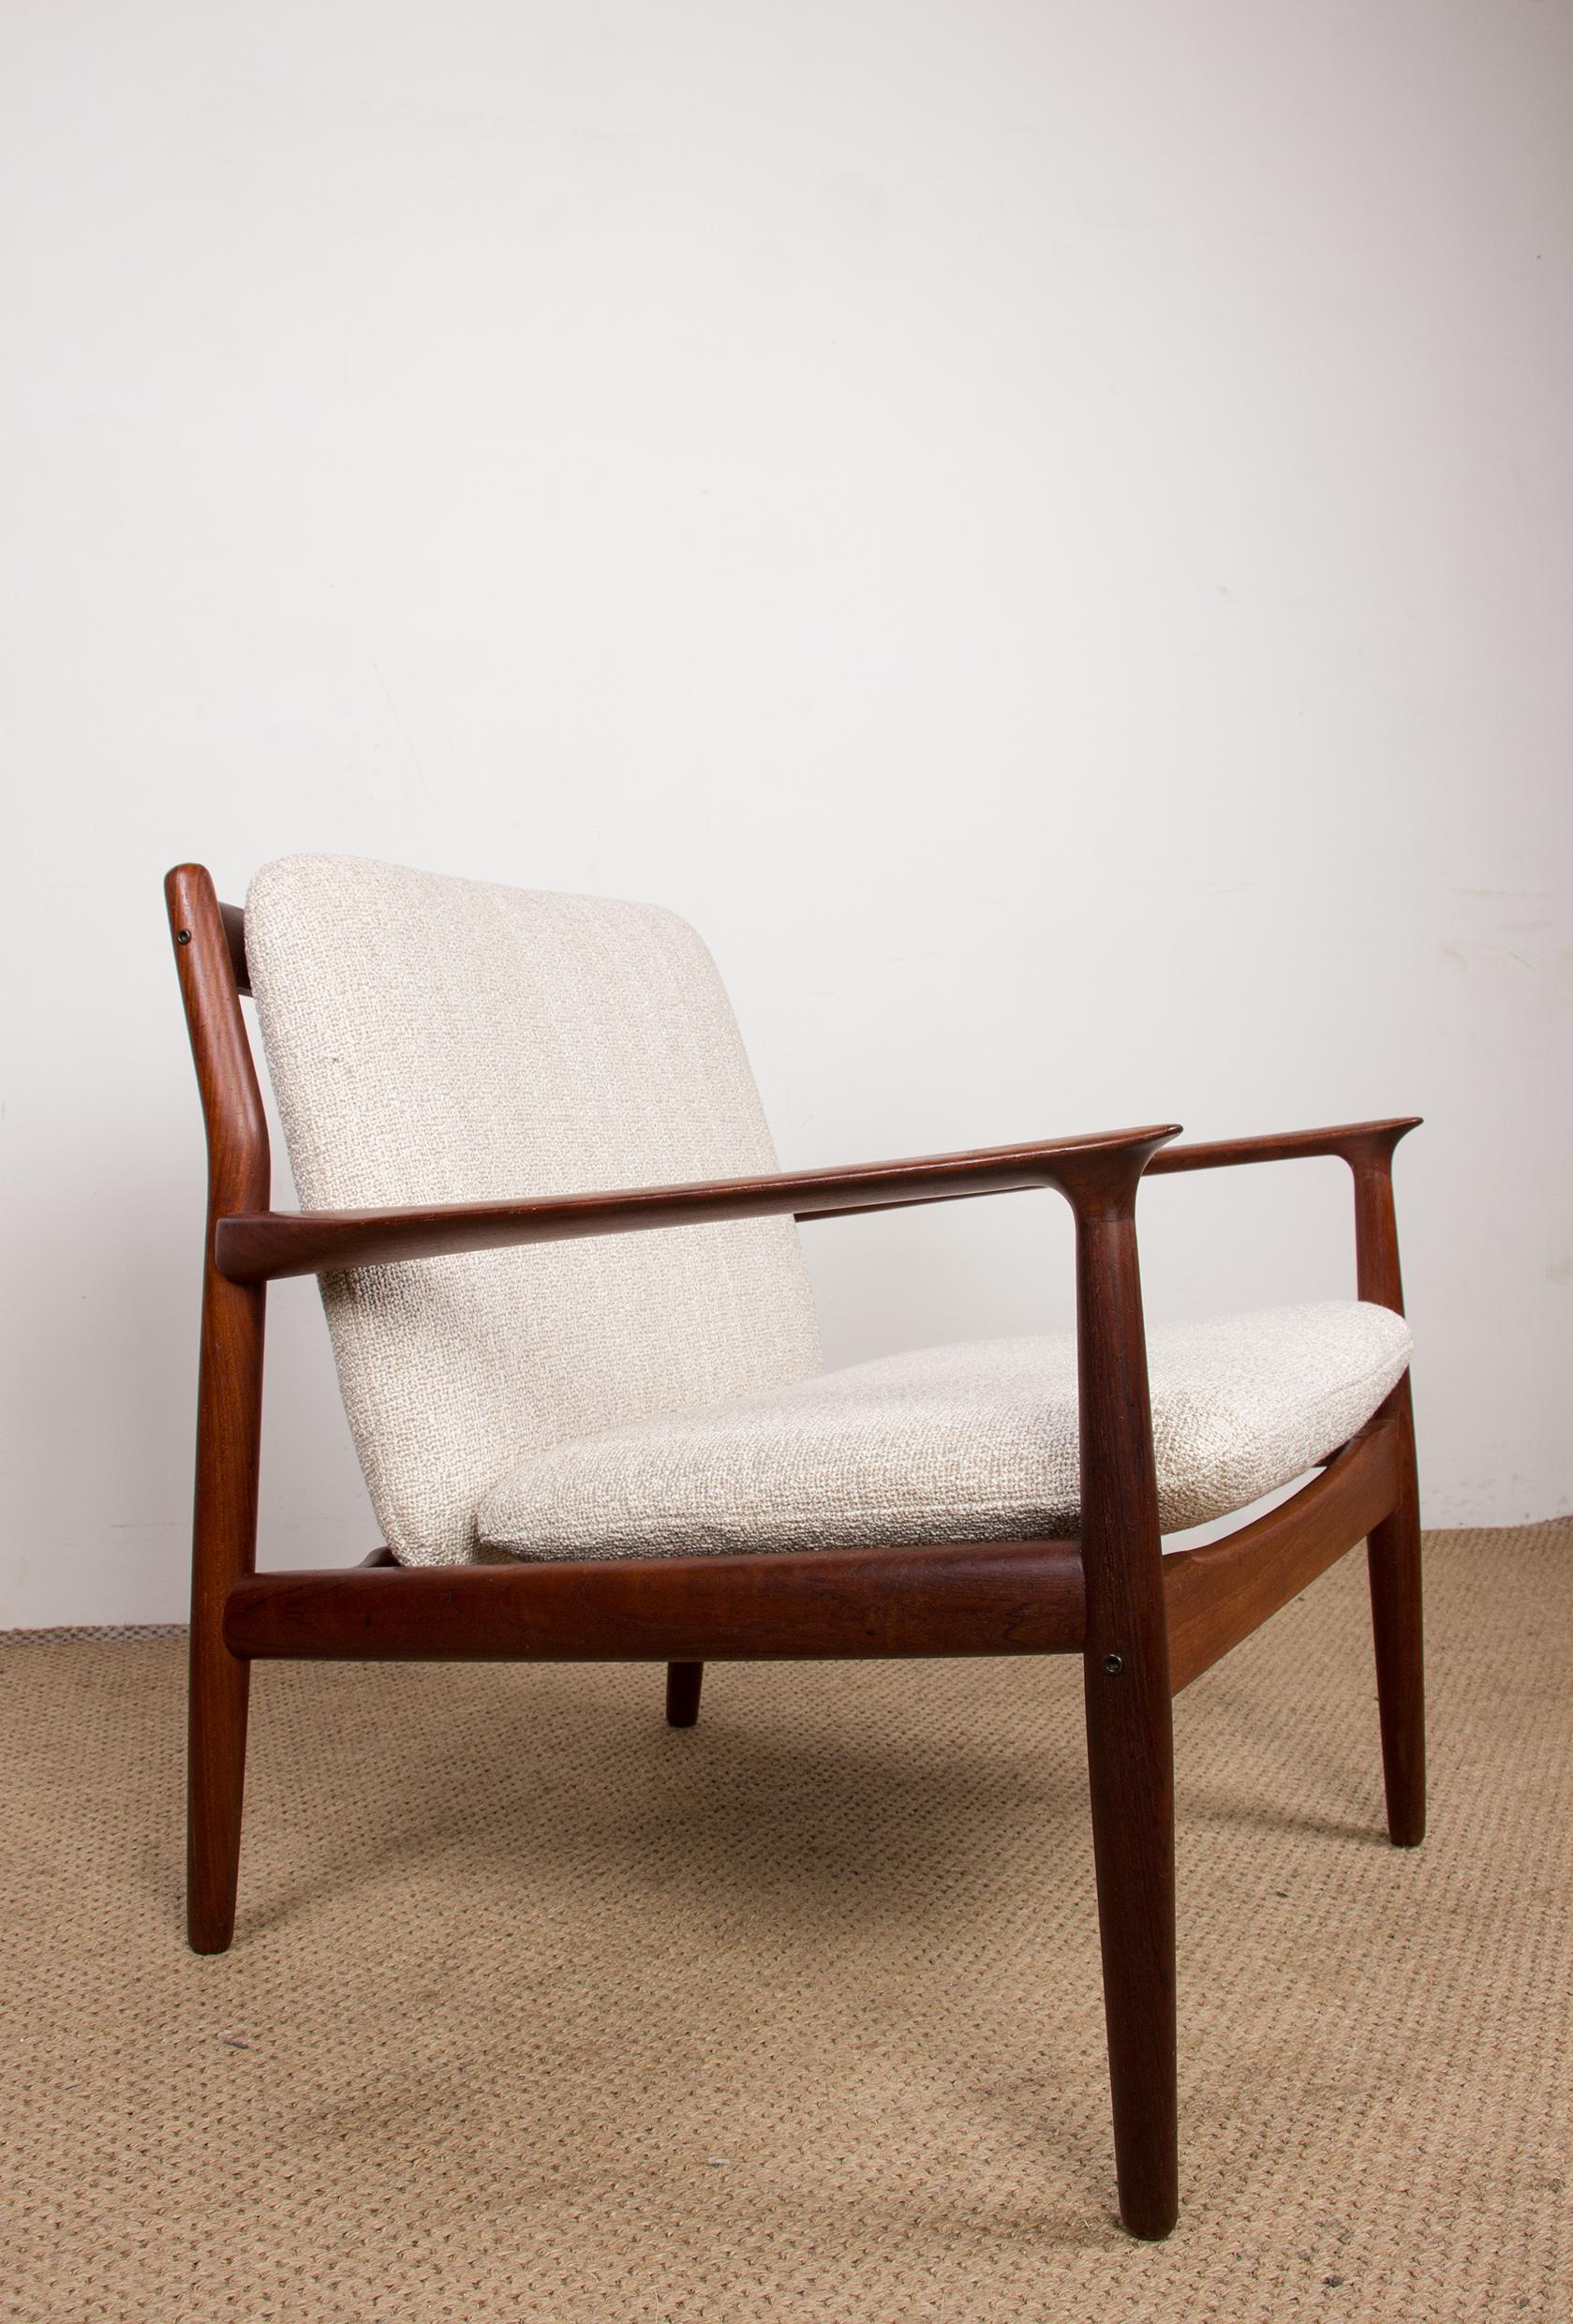 Pair of Danish Teak and New Bouclette Fabric Armchairs, by Svend Aage Eriksen 3